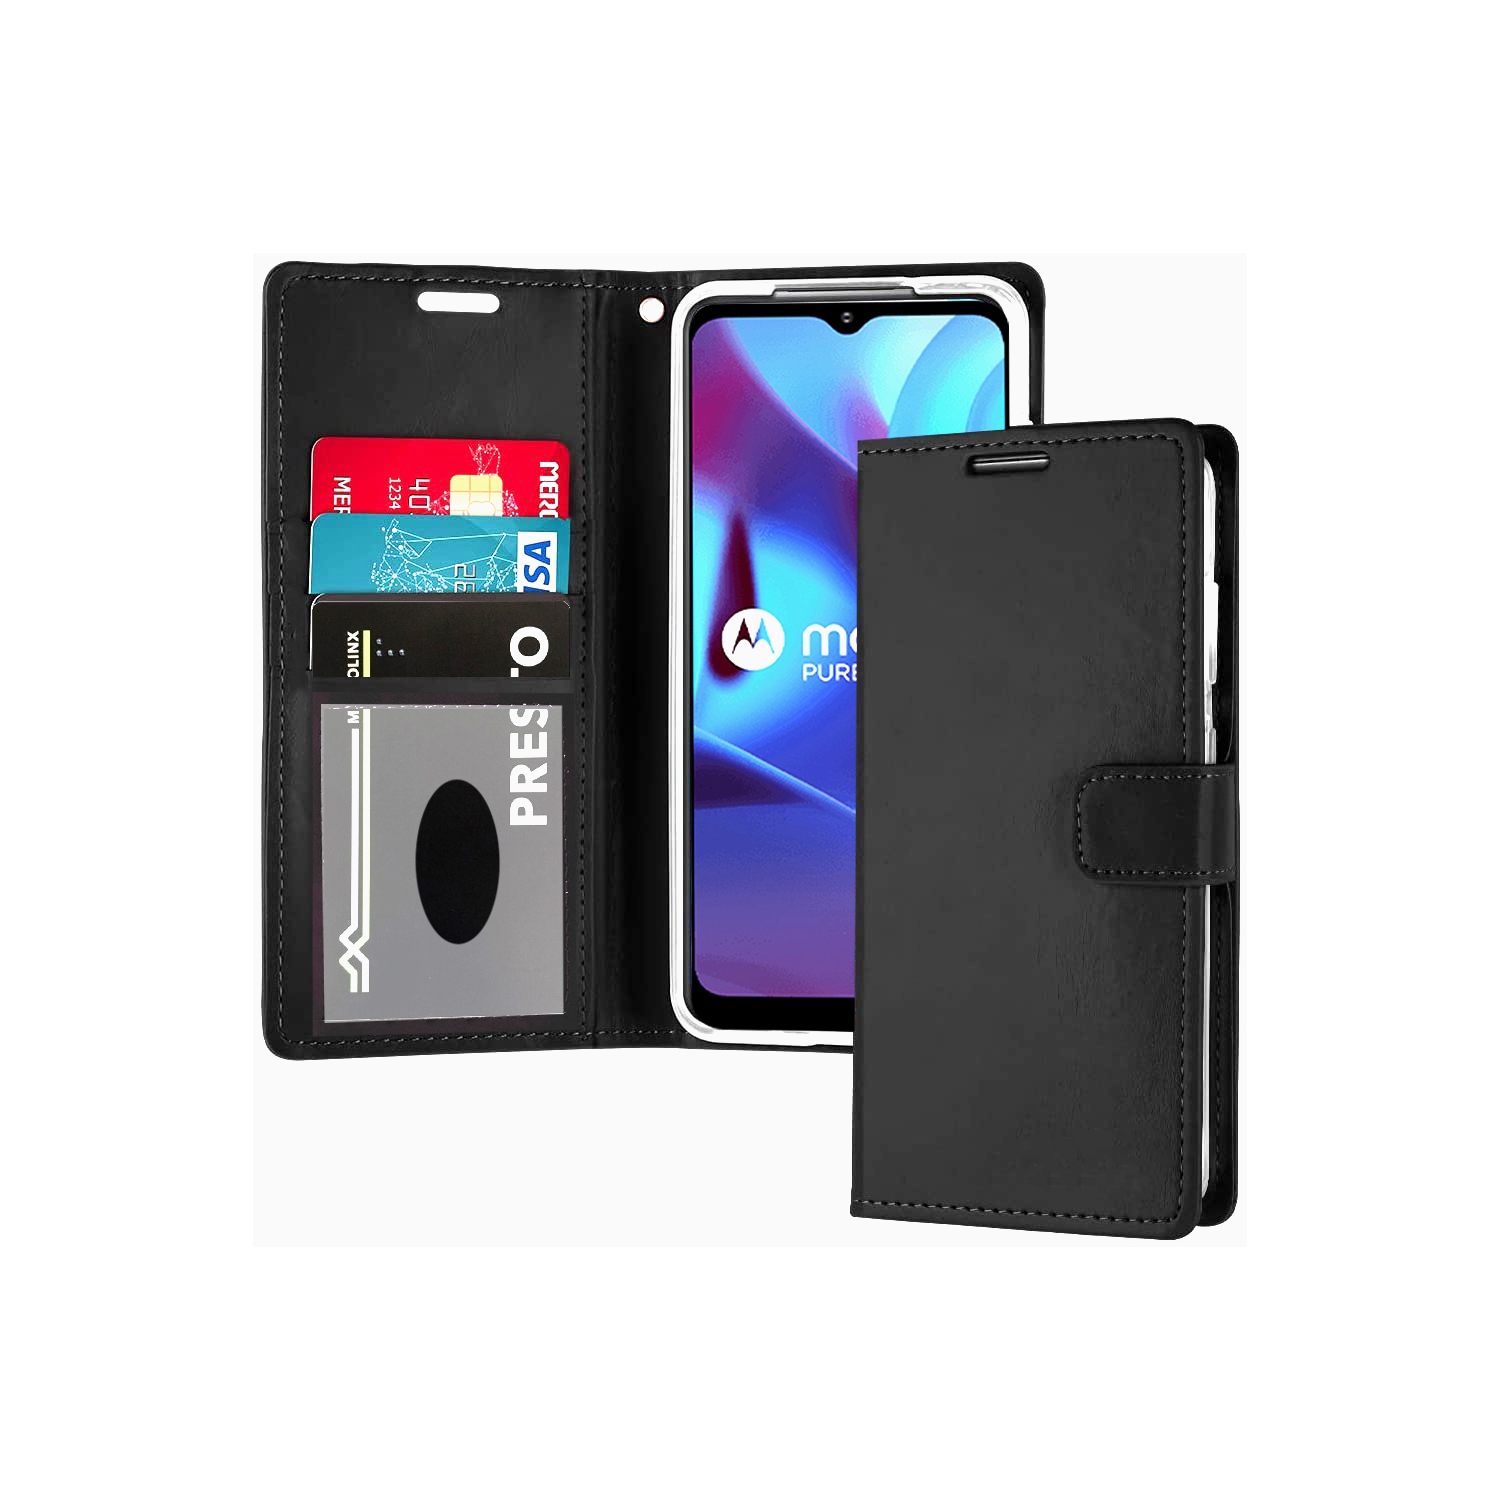 XCRS Folio Magnetic Wallet Cover, PU Leather Pouch with Card Slot and Stand Case for Motorola Moto E/E (2020).